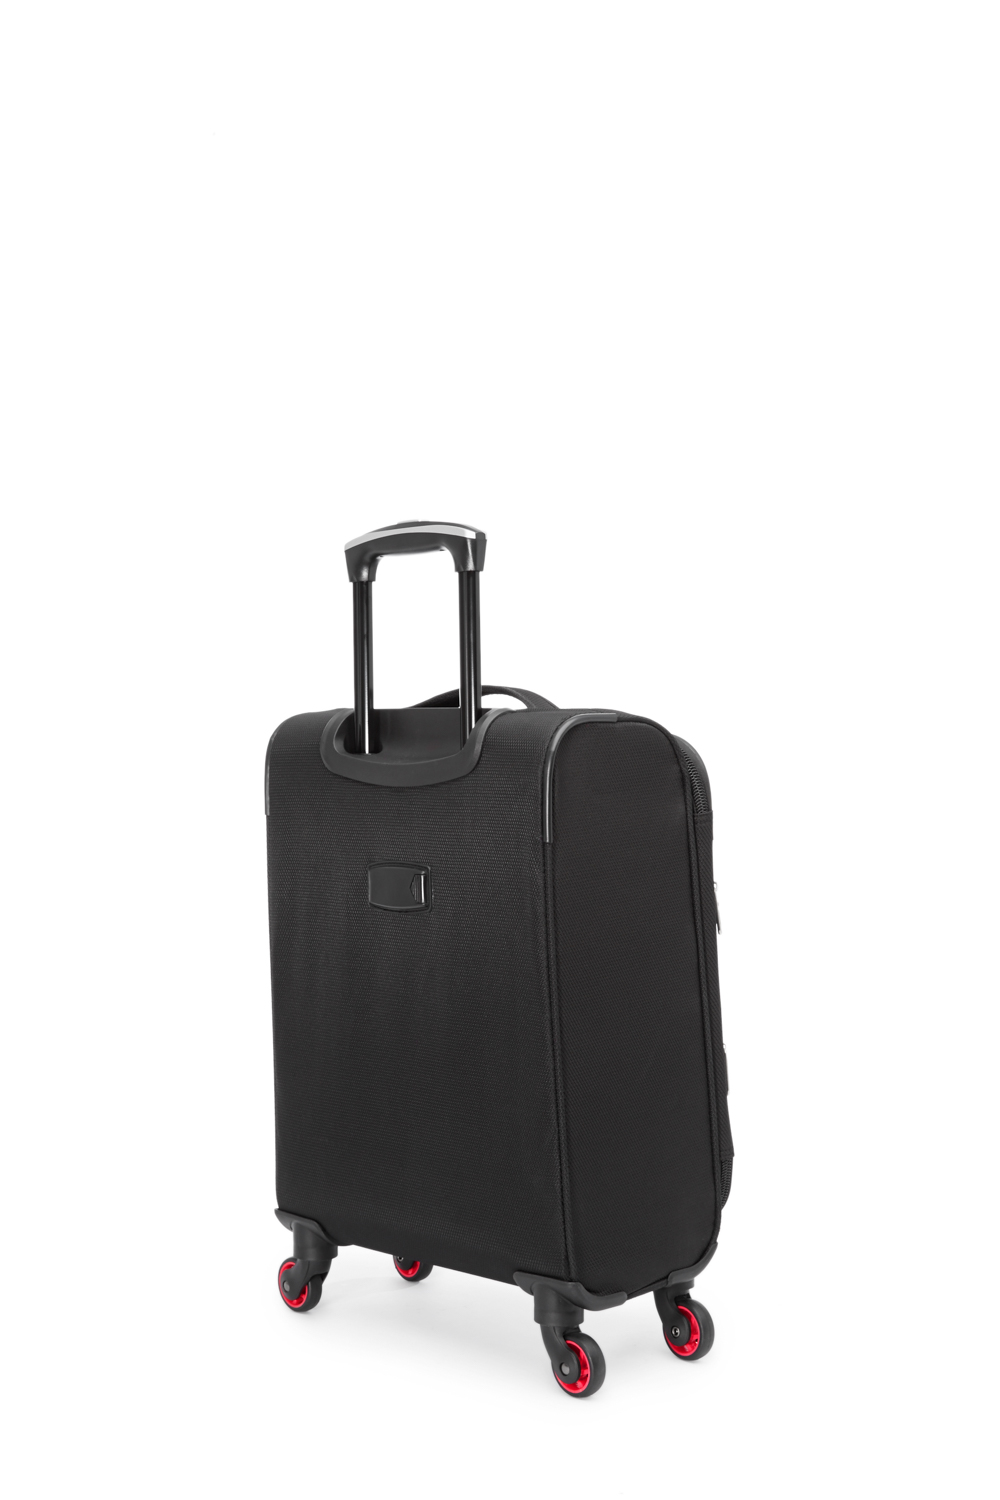 Swissgear Empire Collection Carry-On Upright Luggage - Black/Pink